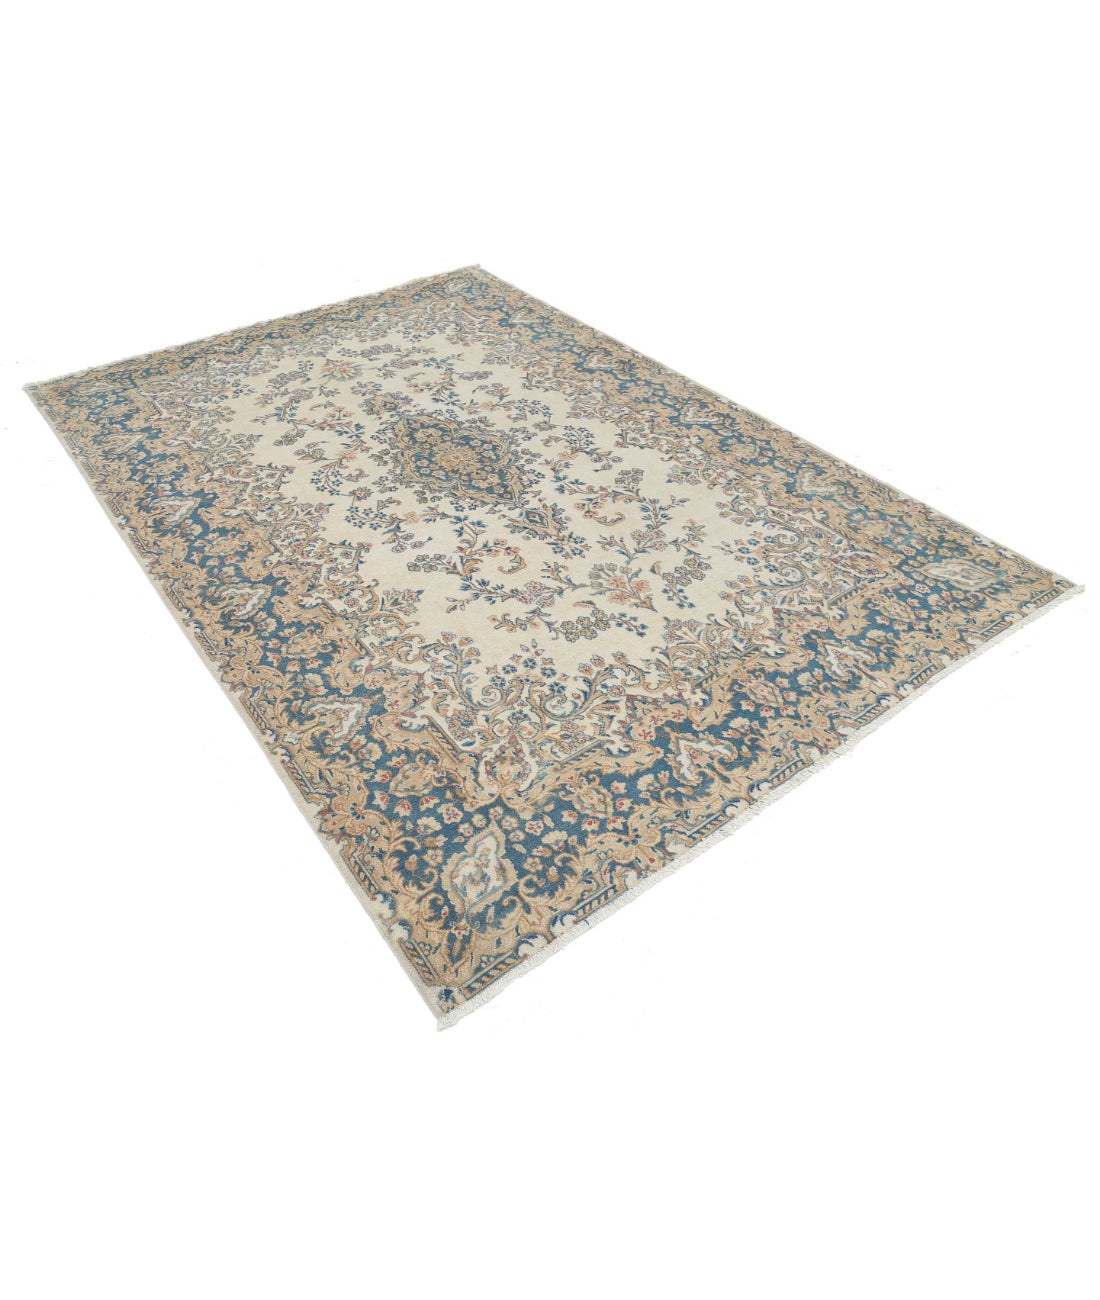 Hand Knotted Vintage Persian Kerman Wool Rug - 5'10'' x 8'6'' 5'10'' x 8'6'' (175 X 255) / Ivory / Blue